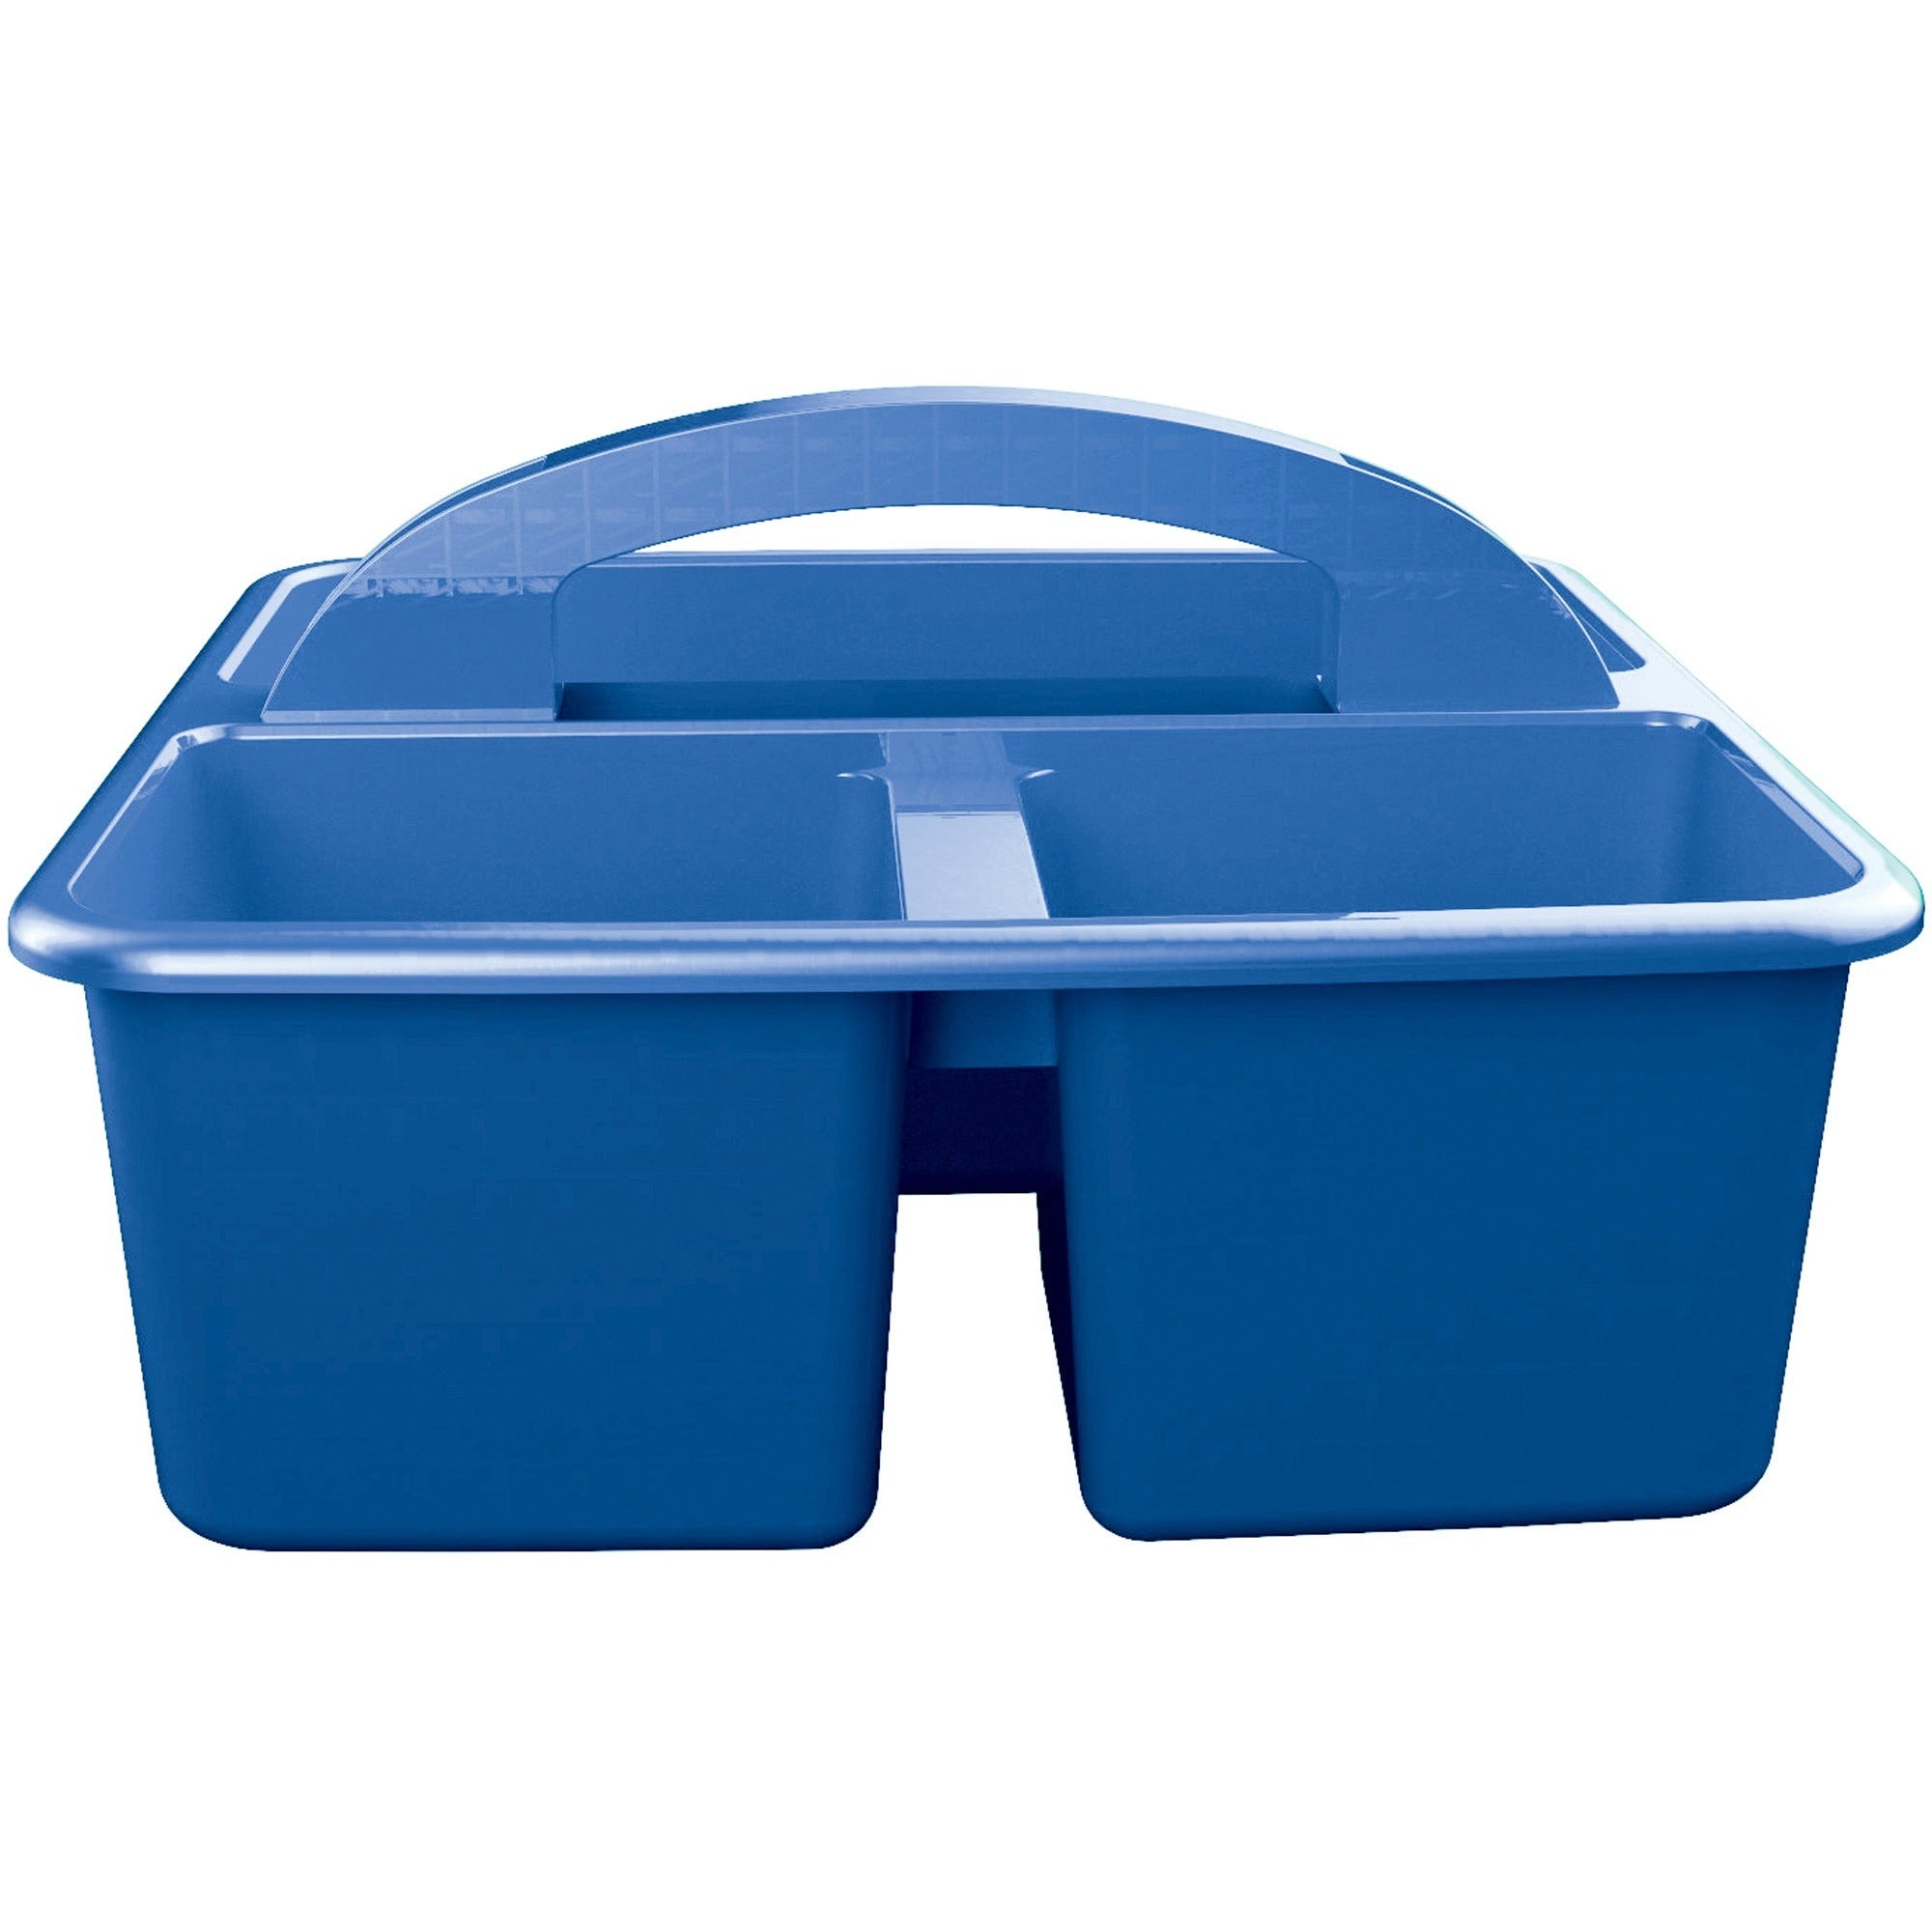 deflecto-antimicrobial-kids-storage-caddy-3-compartments-53-height-x-94-width-x-93-depth-antimicrobial-lightweight-portable-mold-resistant-mildew-resistant-durable-washable-stackable-blue-polypropylene-1-each_def39505blu - 2